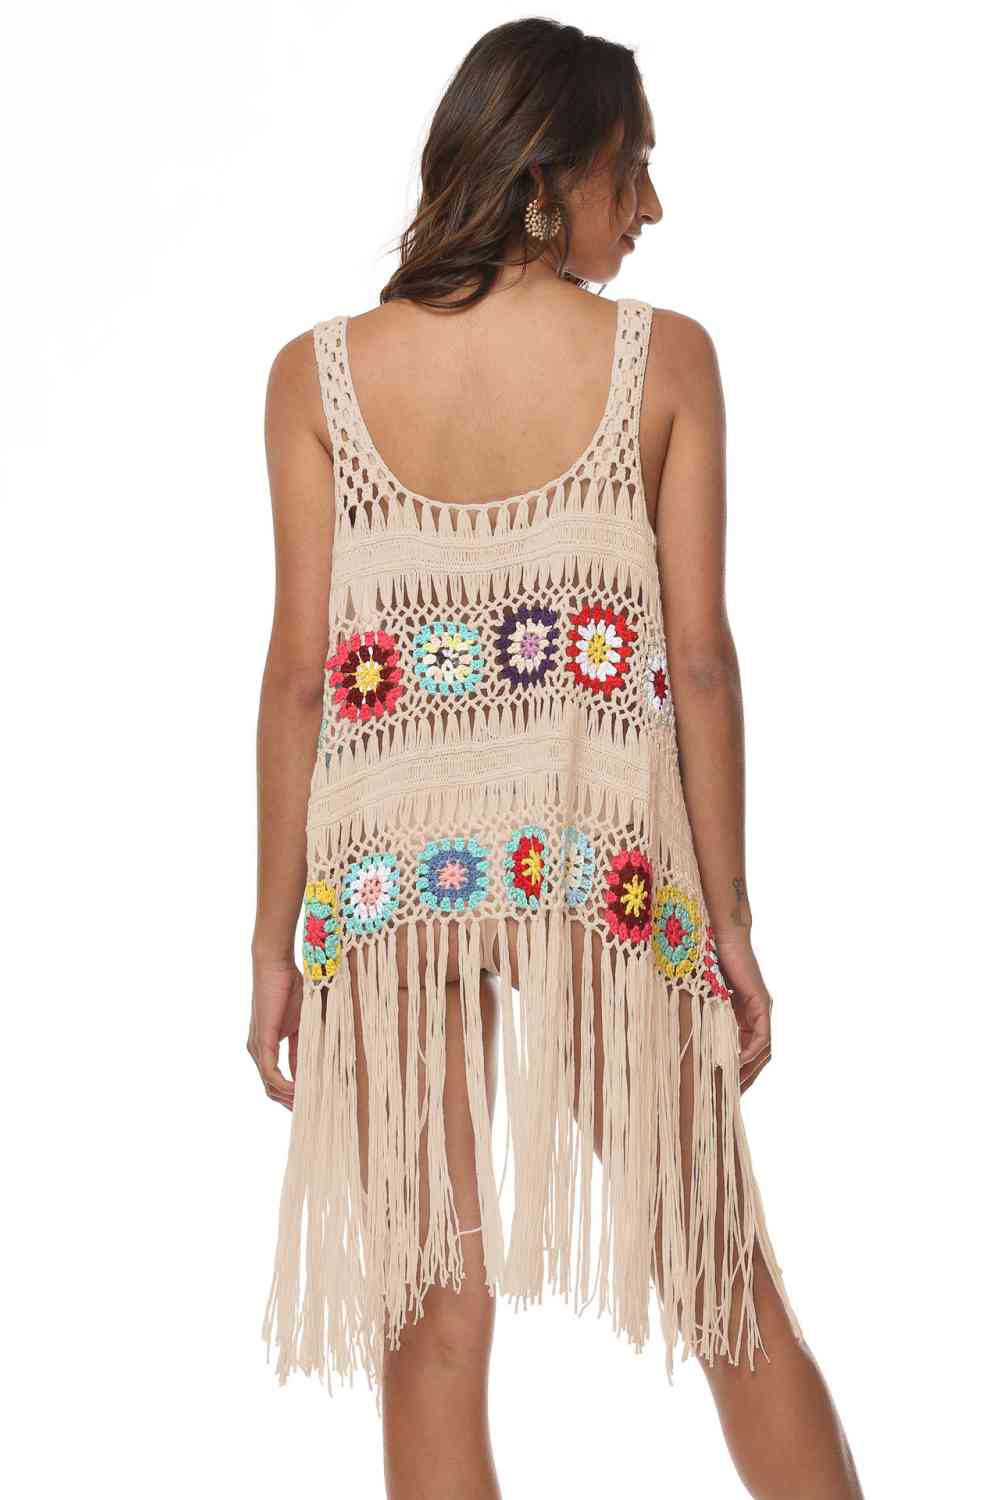 Openwork Fringe Detail Embroidery Sleeveless Cover-Up - Sufyaa